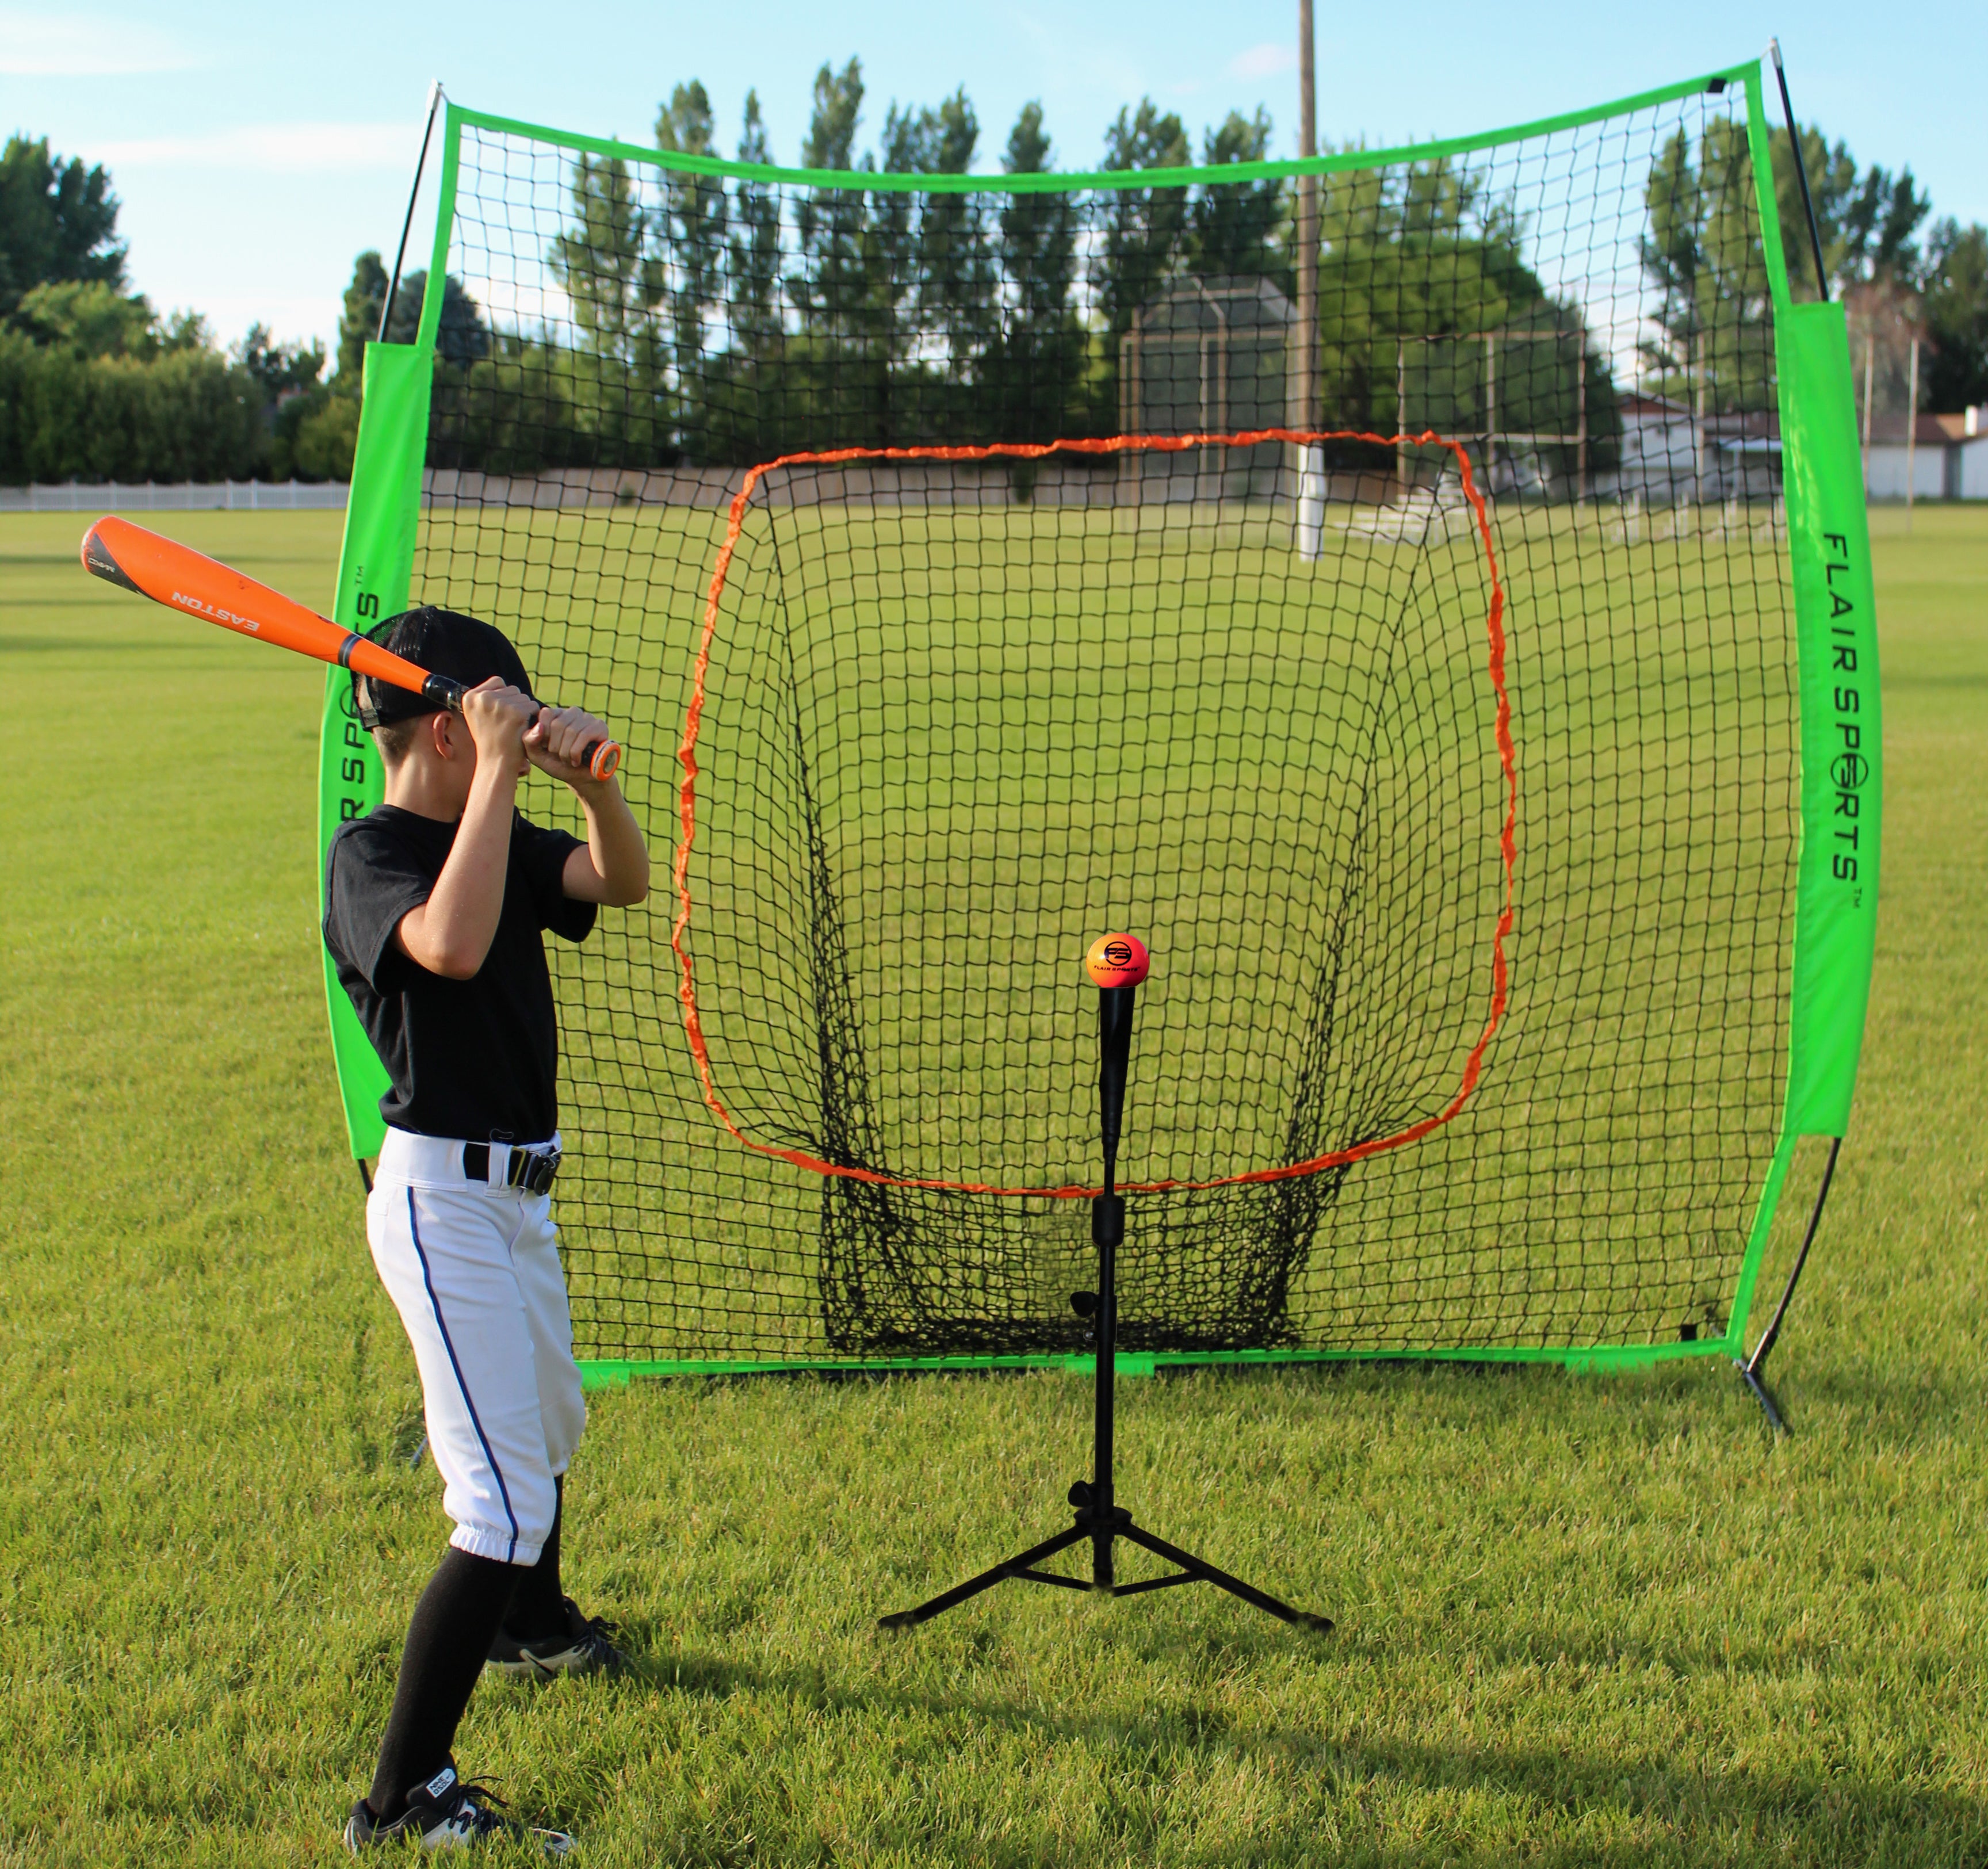 Flair Sports - Pro Series - Portable Compact Travel Hitting Tee for Baseball/Softball - Training Batting Tee for All Ages - Bonus - 3 Weighted Balls